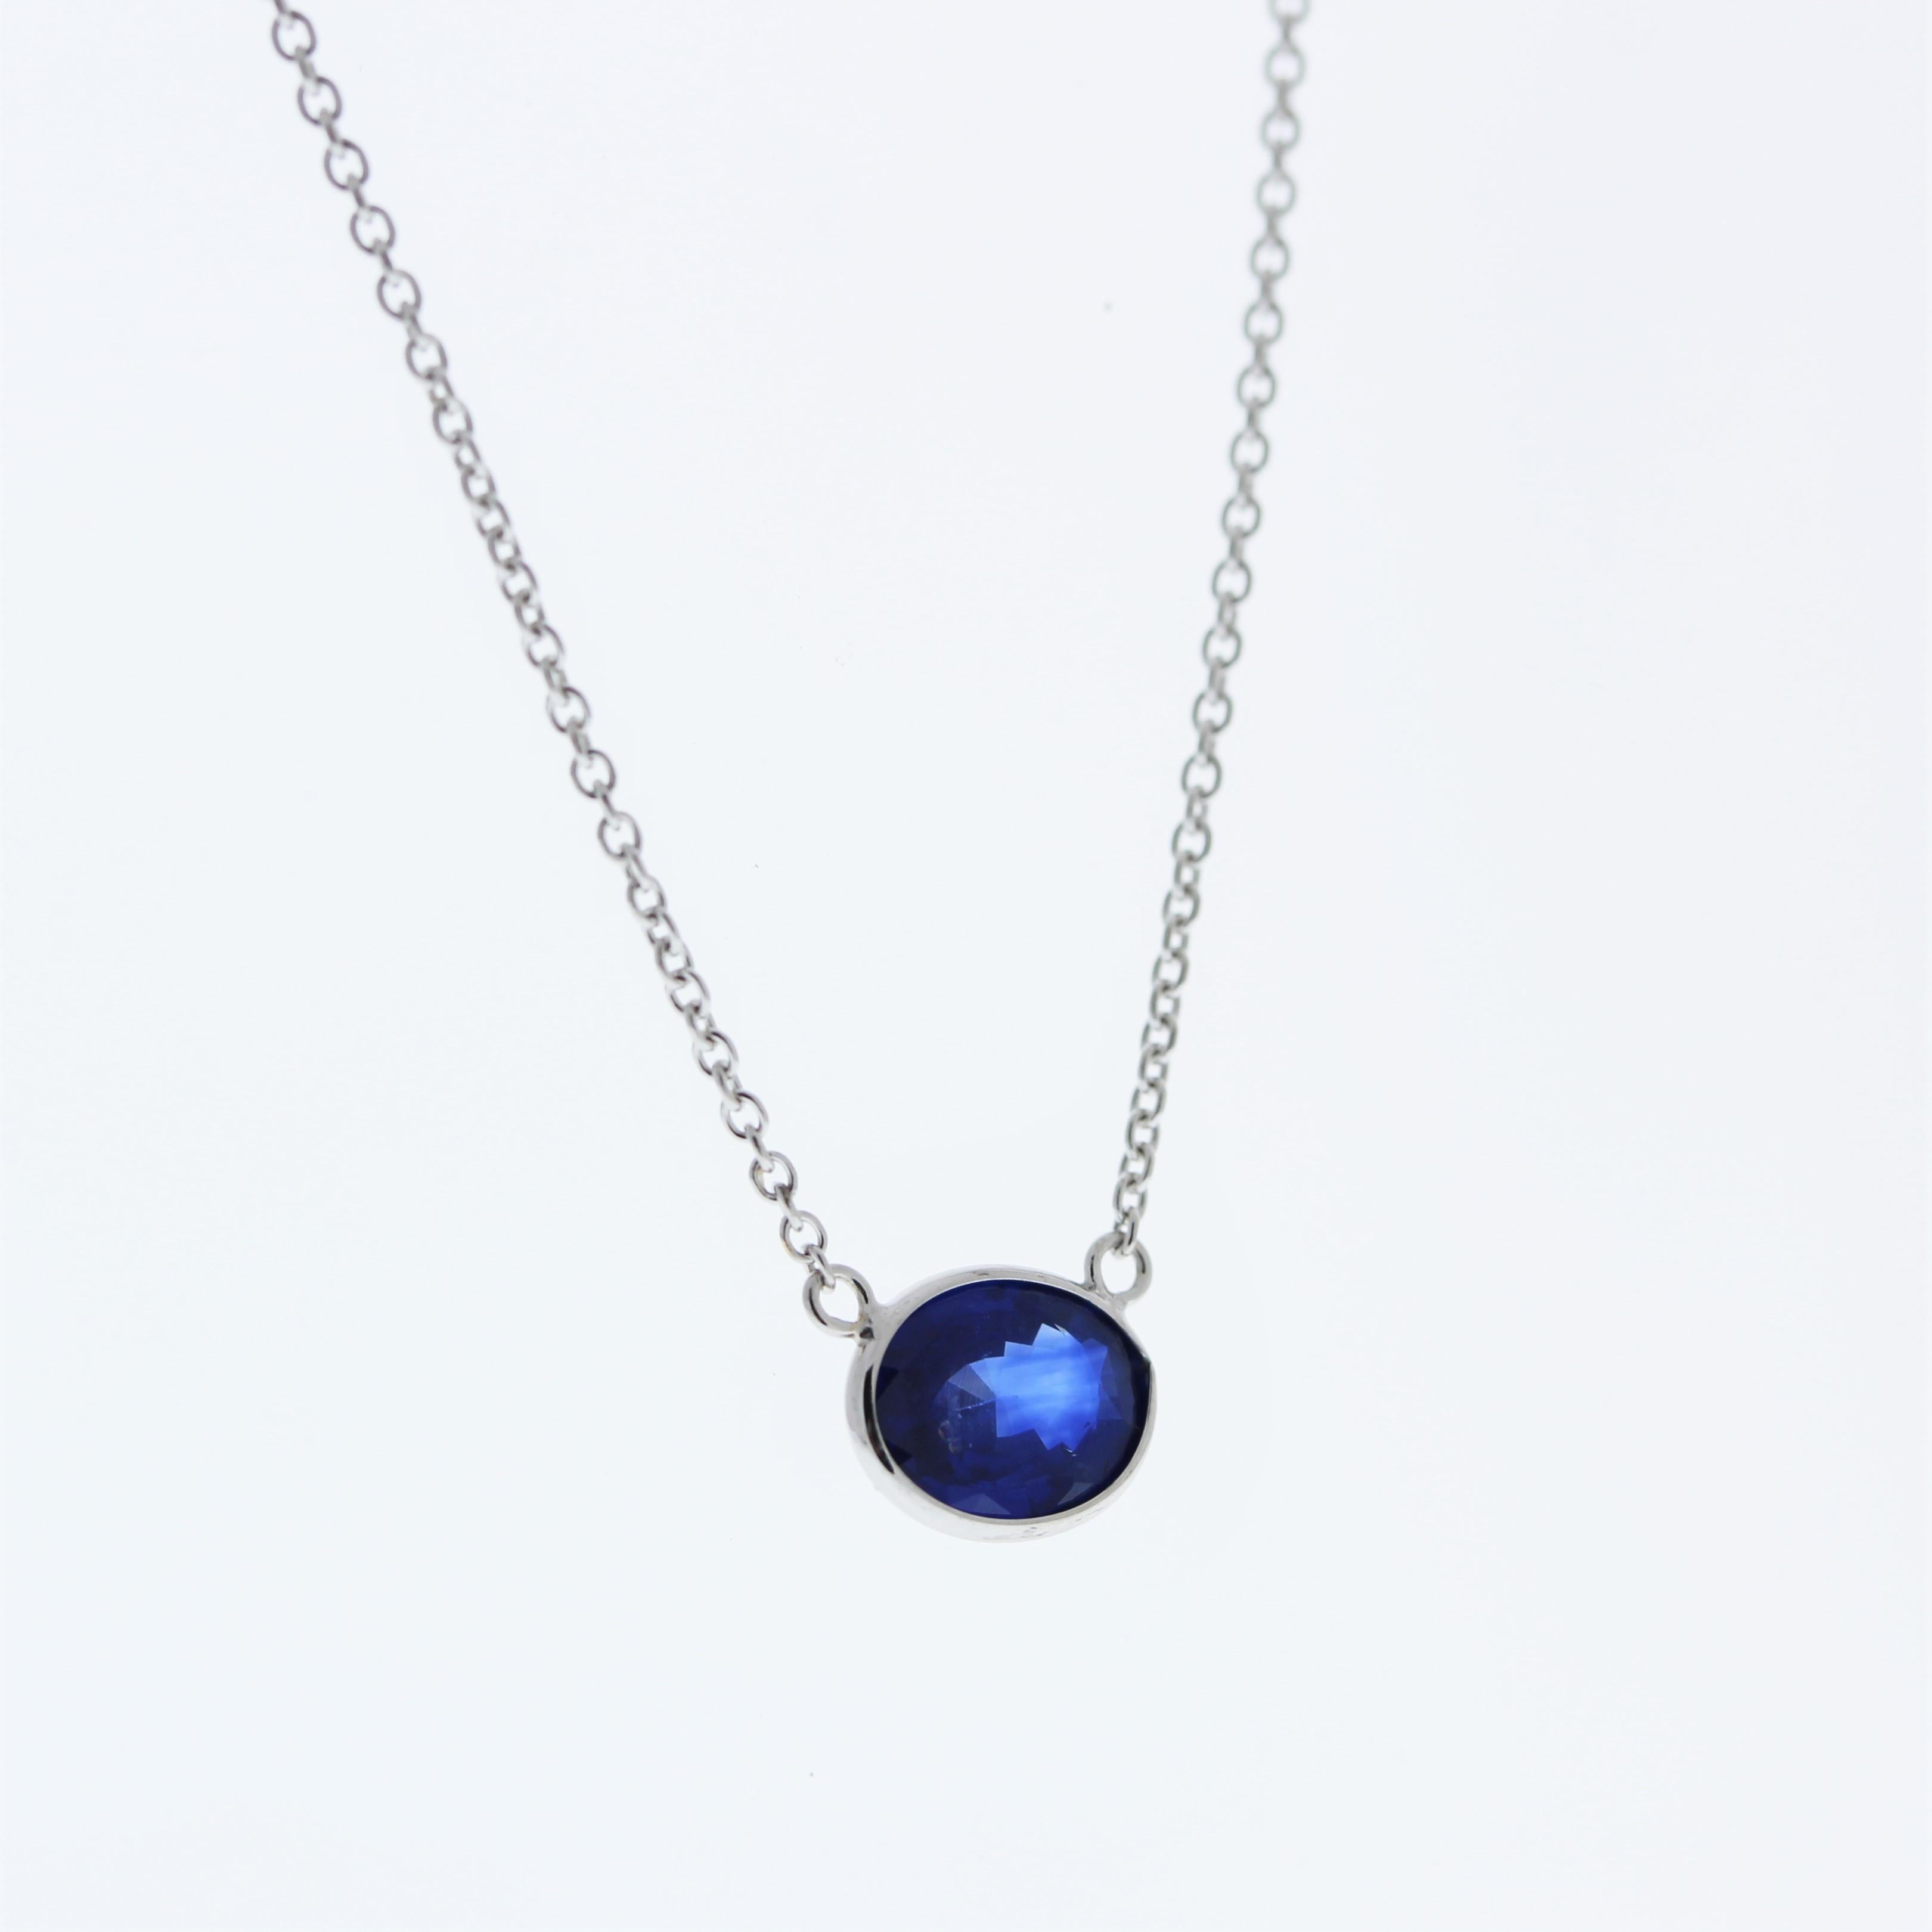 The necklace features a 1.83-carat oval-cut blue sapphire set in a 14 karat white gold pendant or setting. The oval cut and the blue sapphire's color against the white gold setting are likely to create an elegant and striking fashion piece, suitable